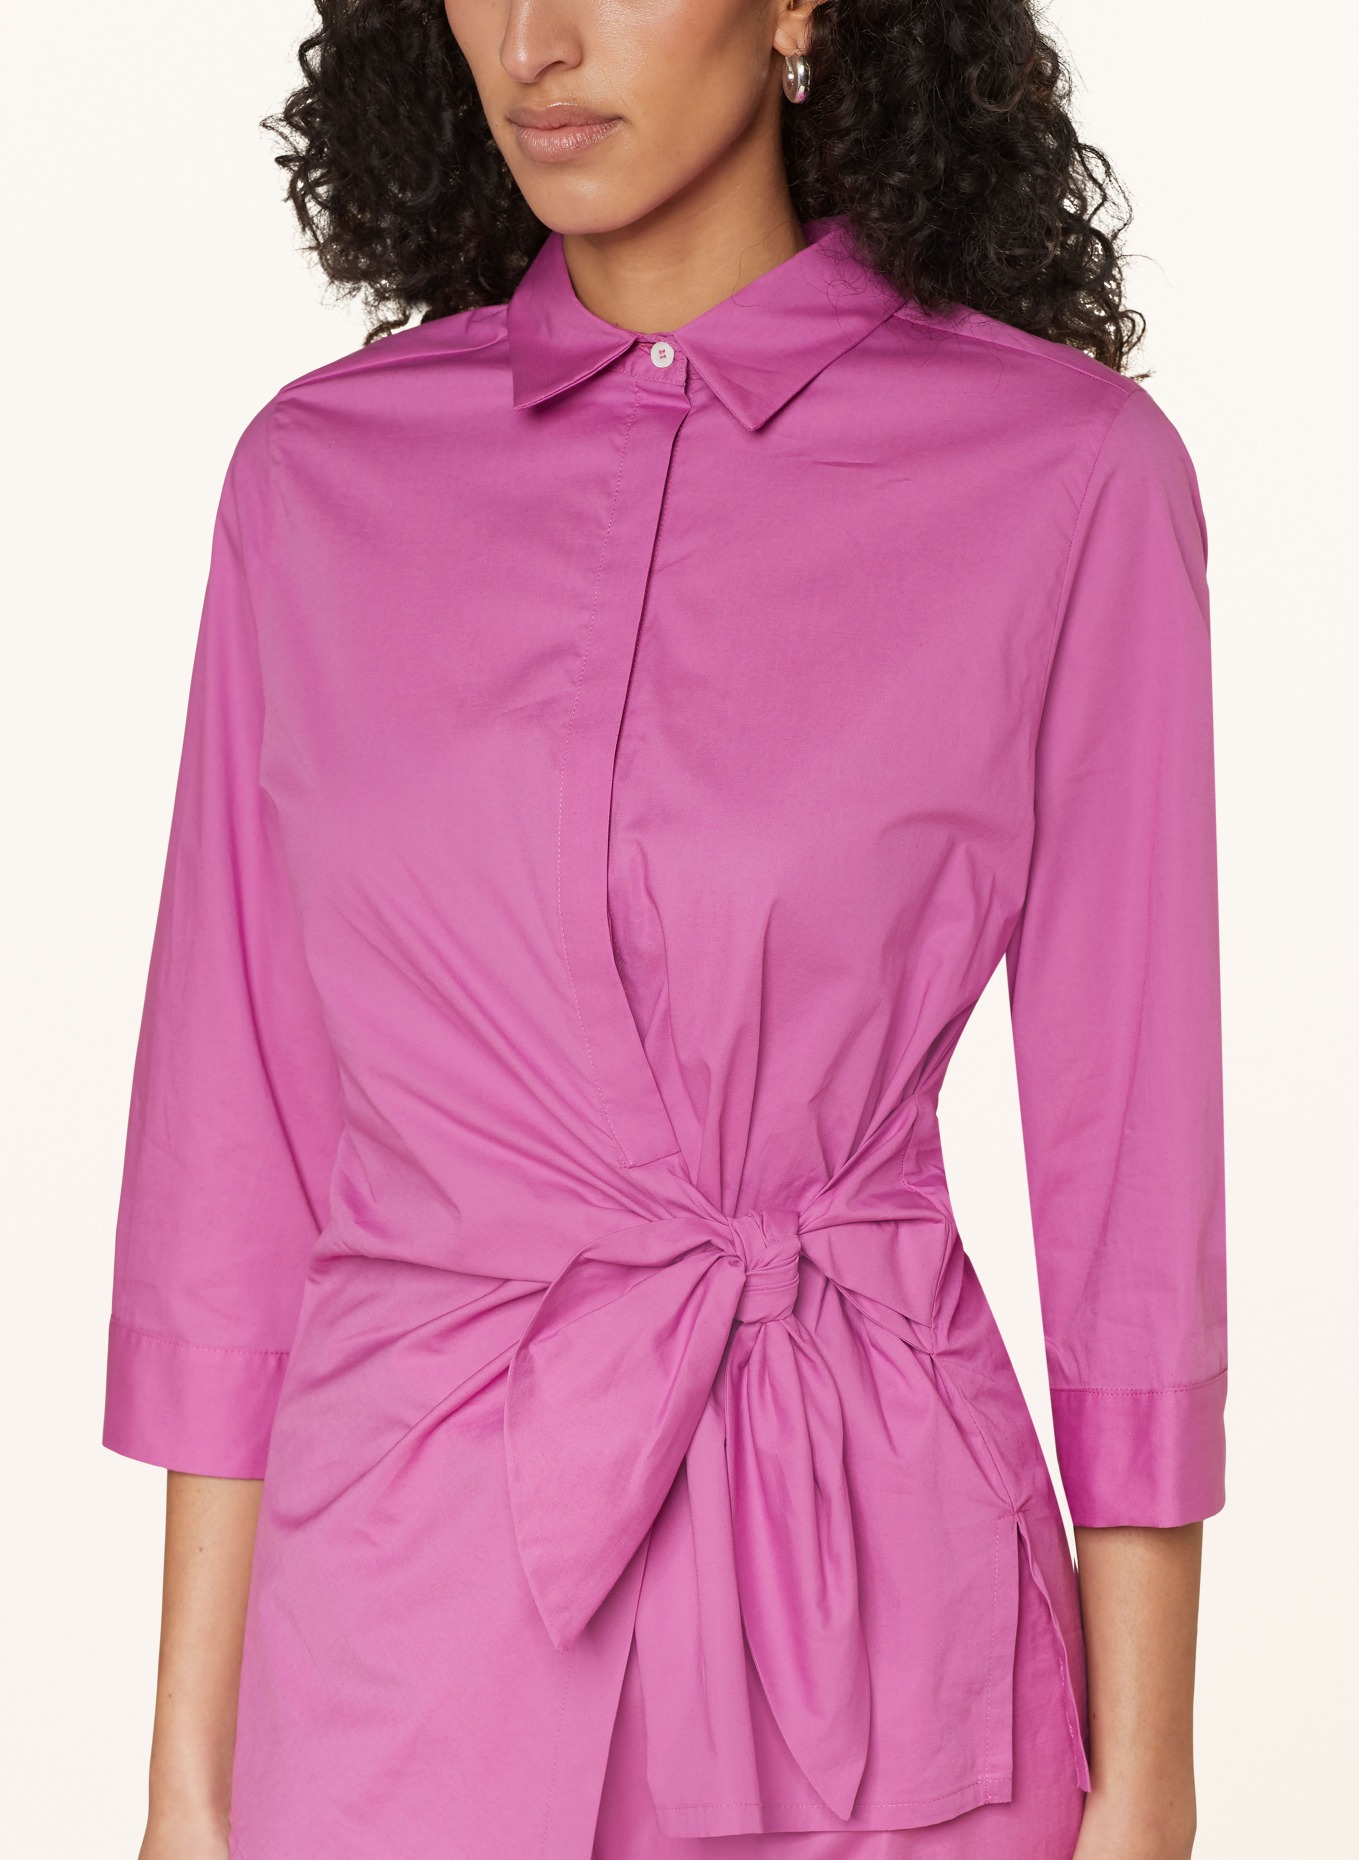 ROSSO35 Shirt blouse with 3/4 sleeves, Color: FUCHSIA (Image 4)